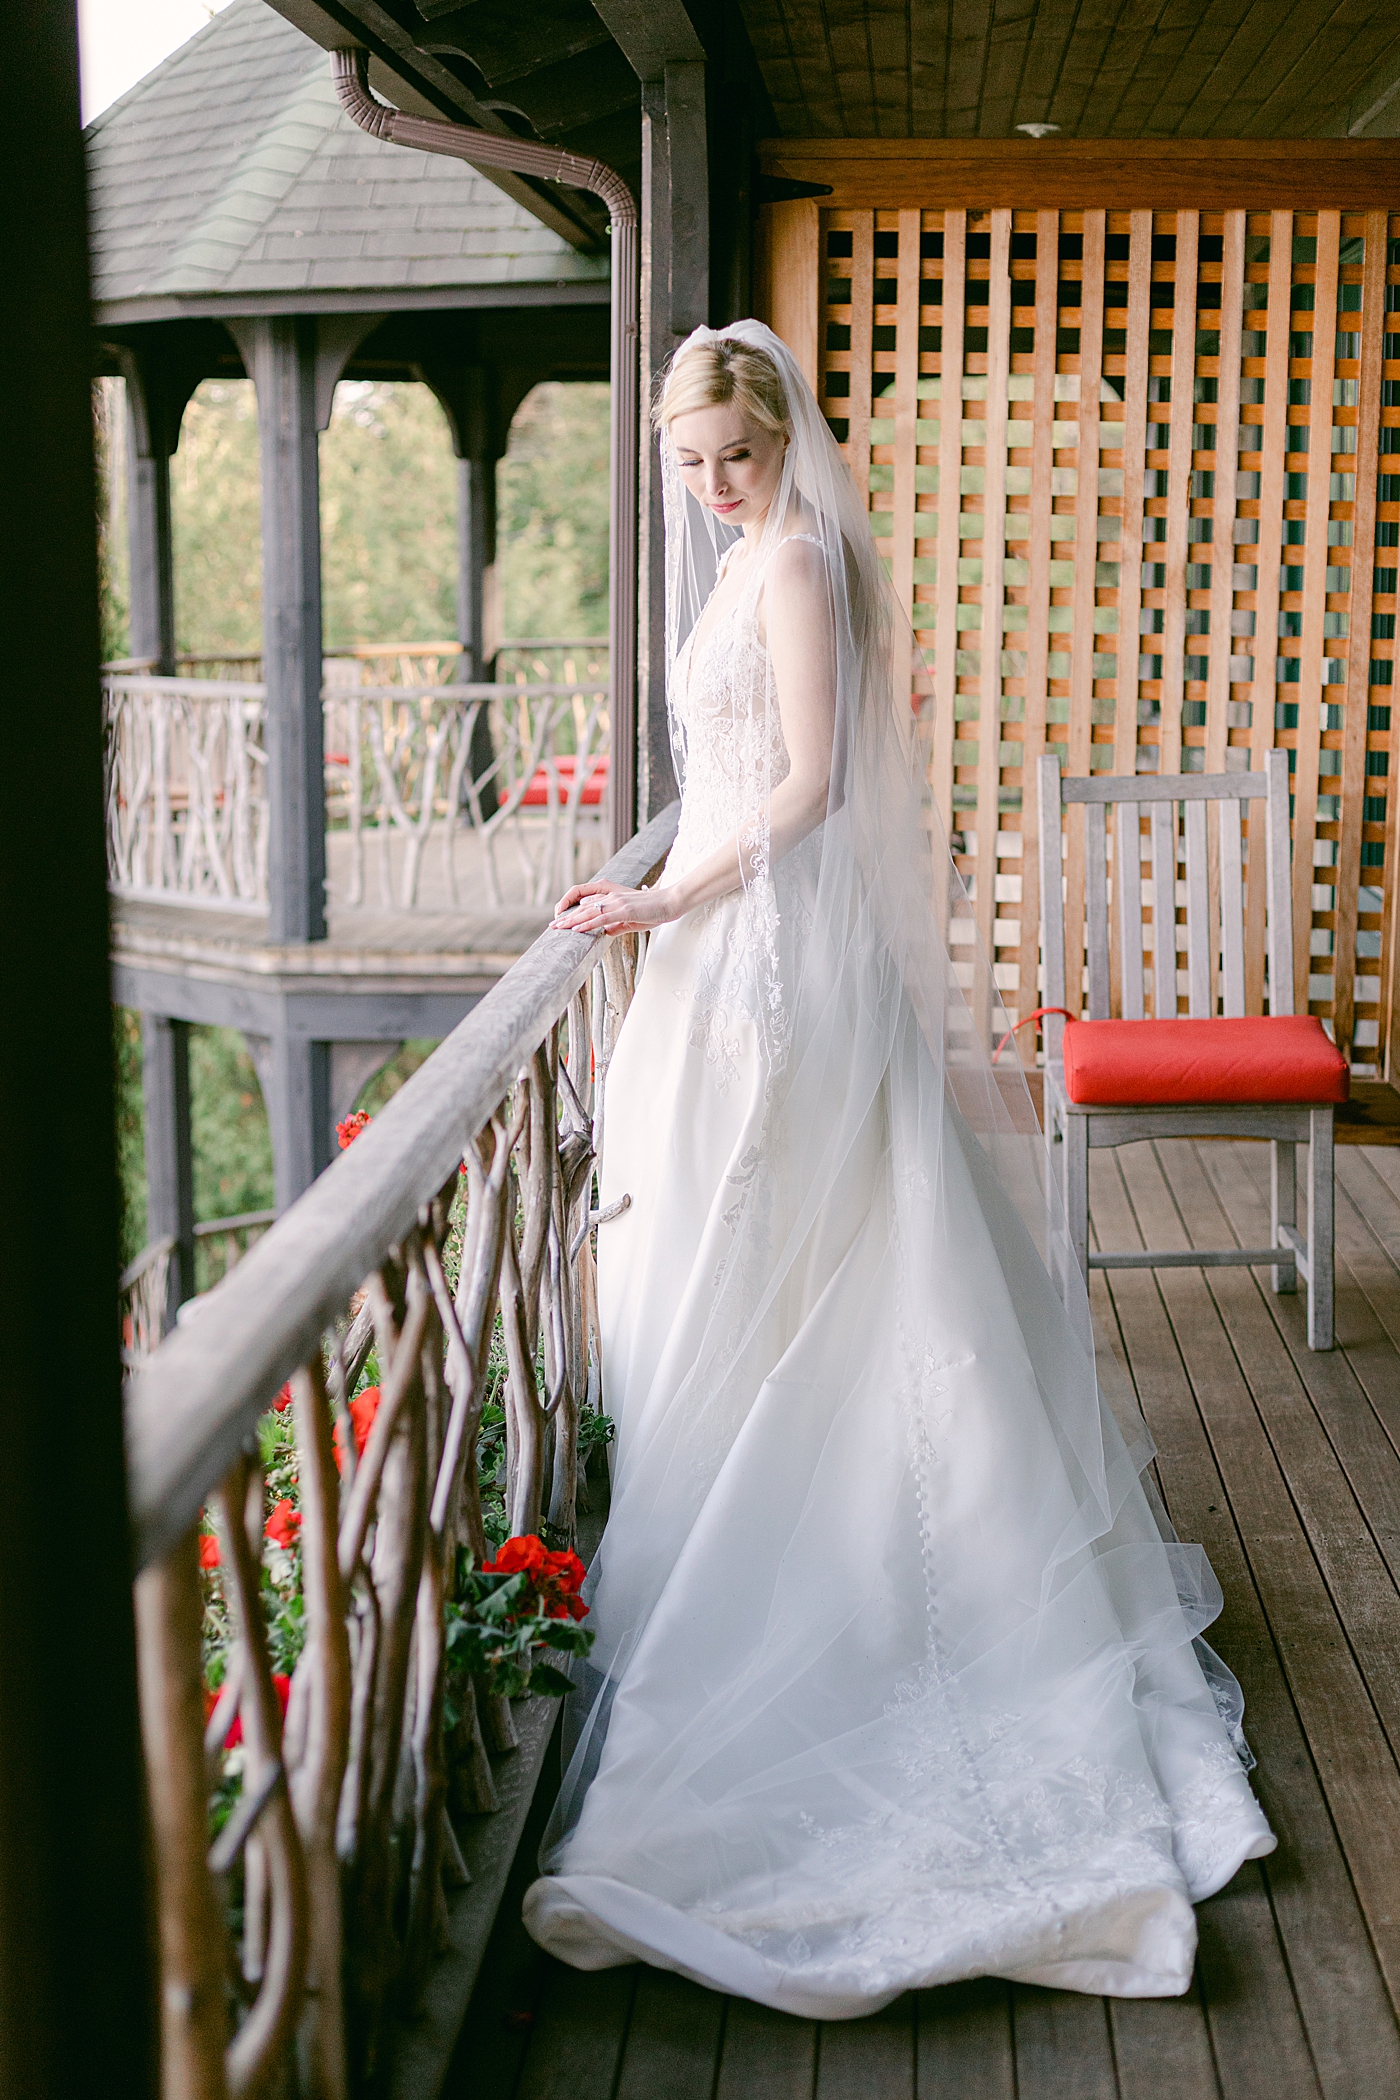 Bridal portraits during Lake Placid Lodge Wedding | Image by Hope Helmuth Photography